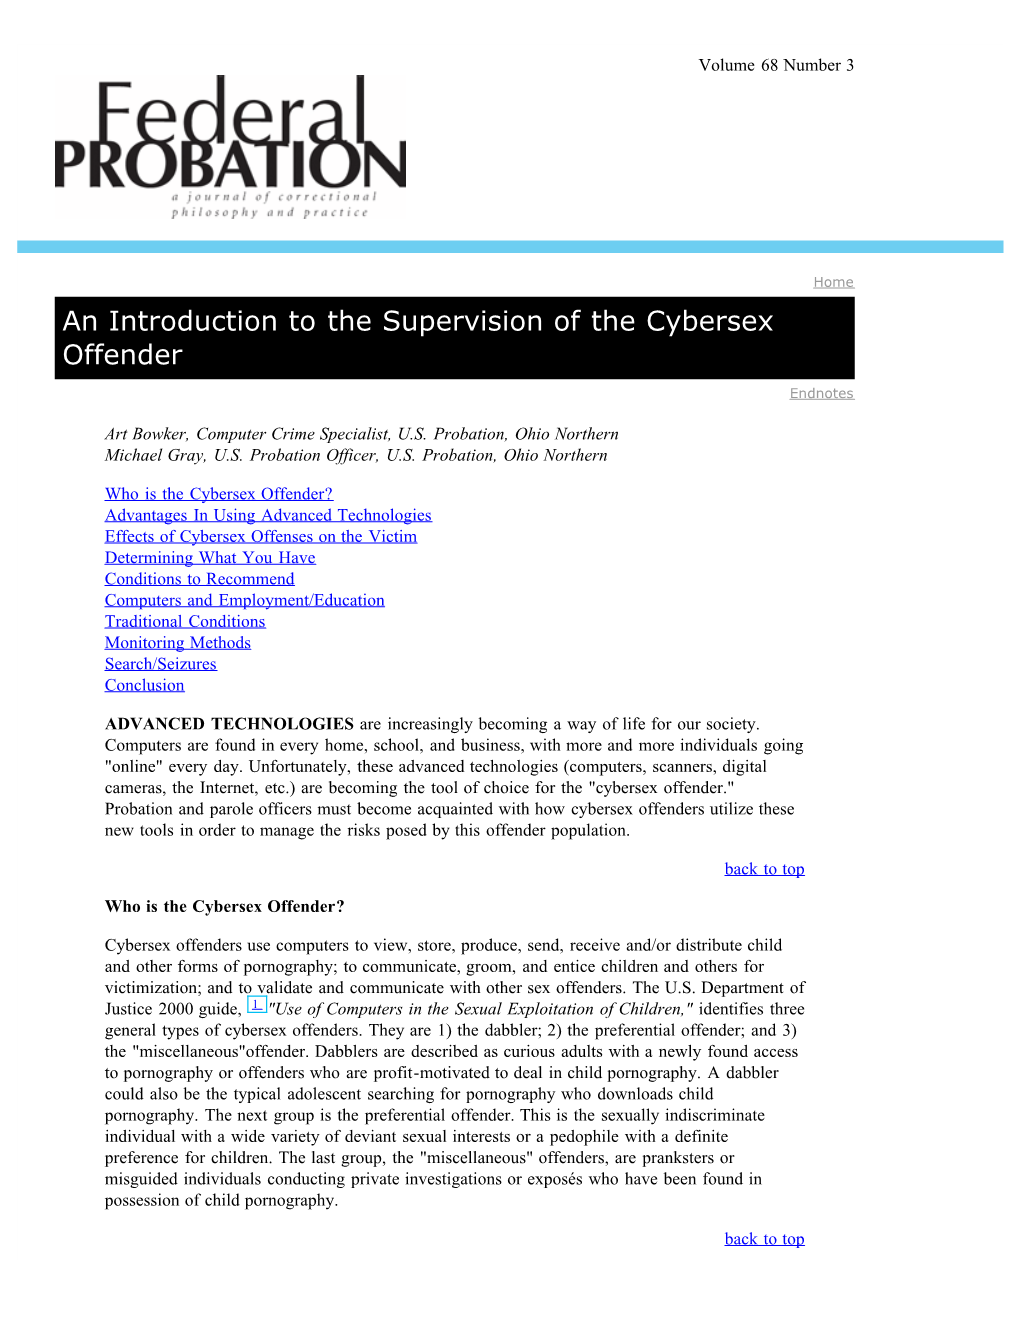 An Introduction to the Supervision of the Cybersex Offender